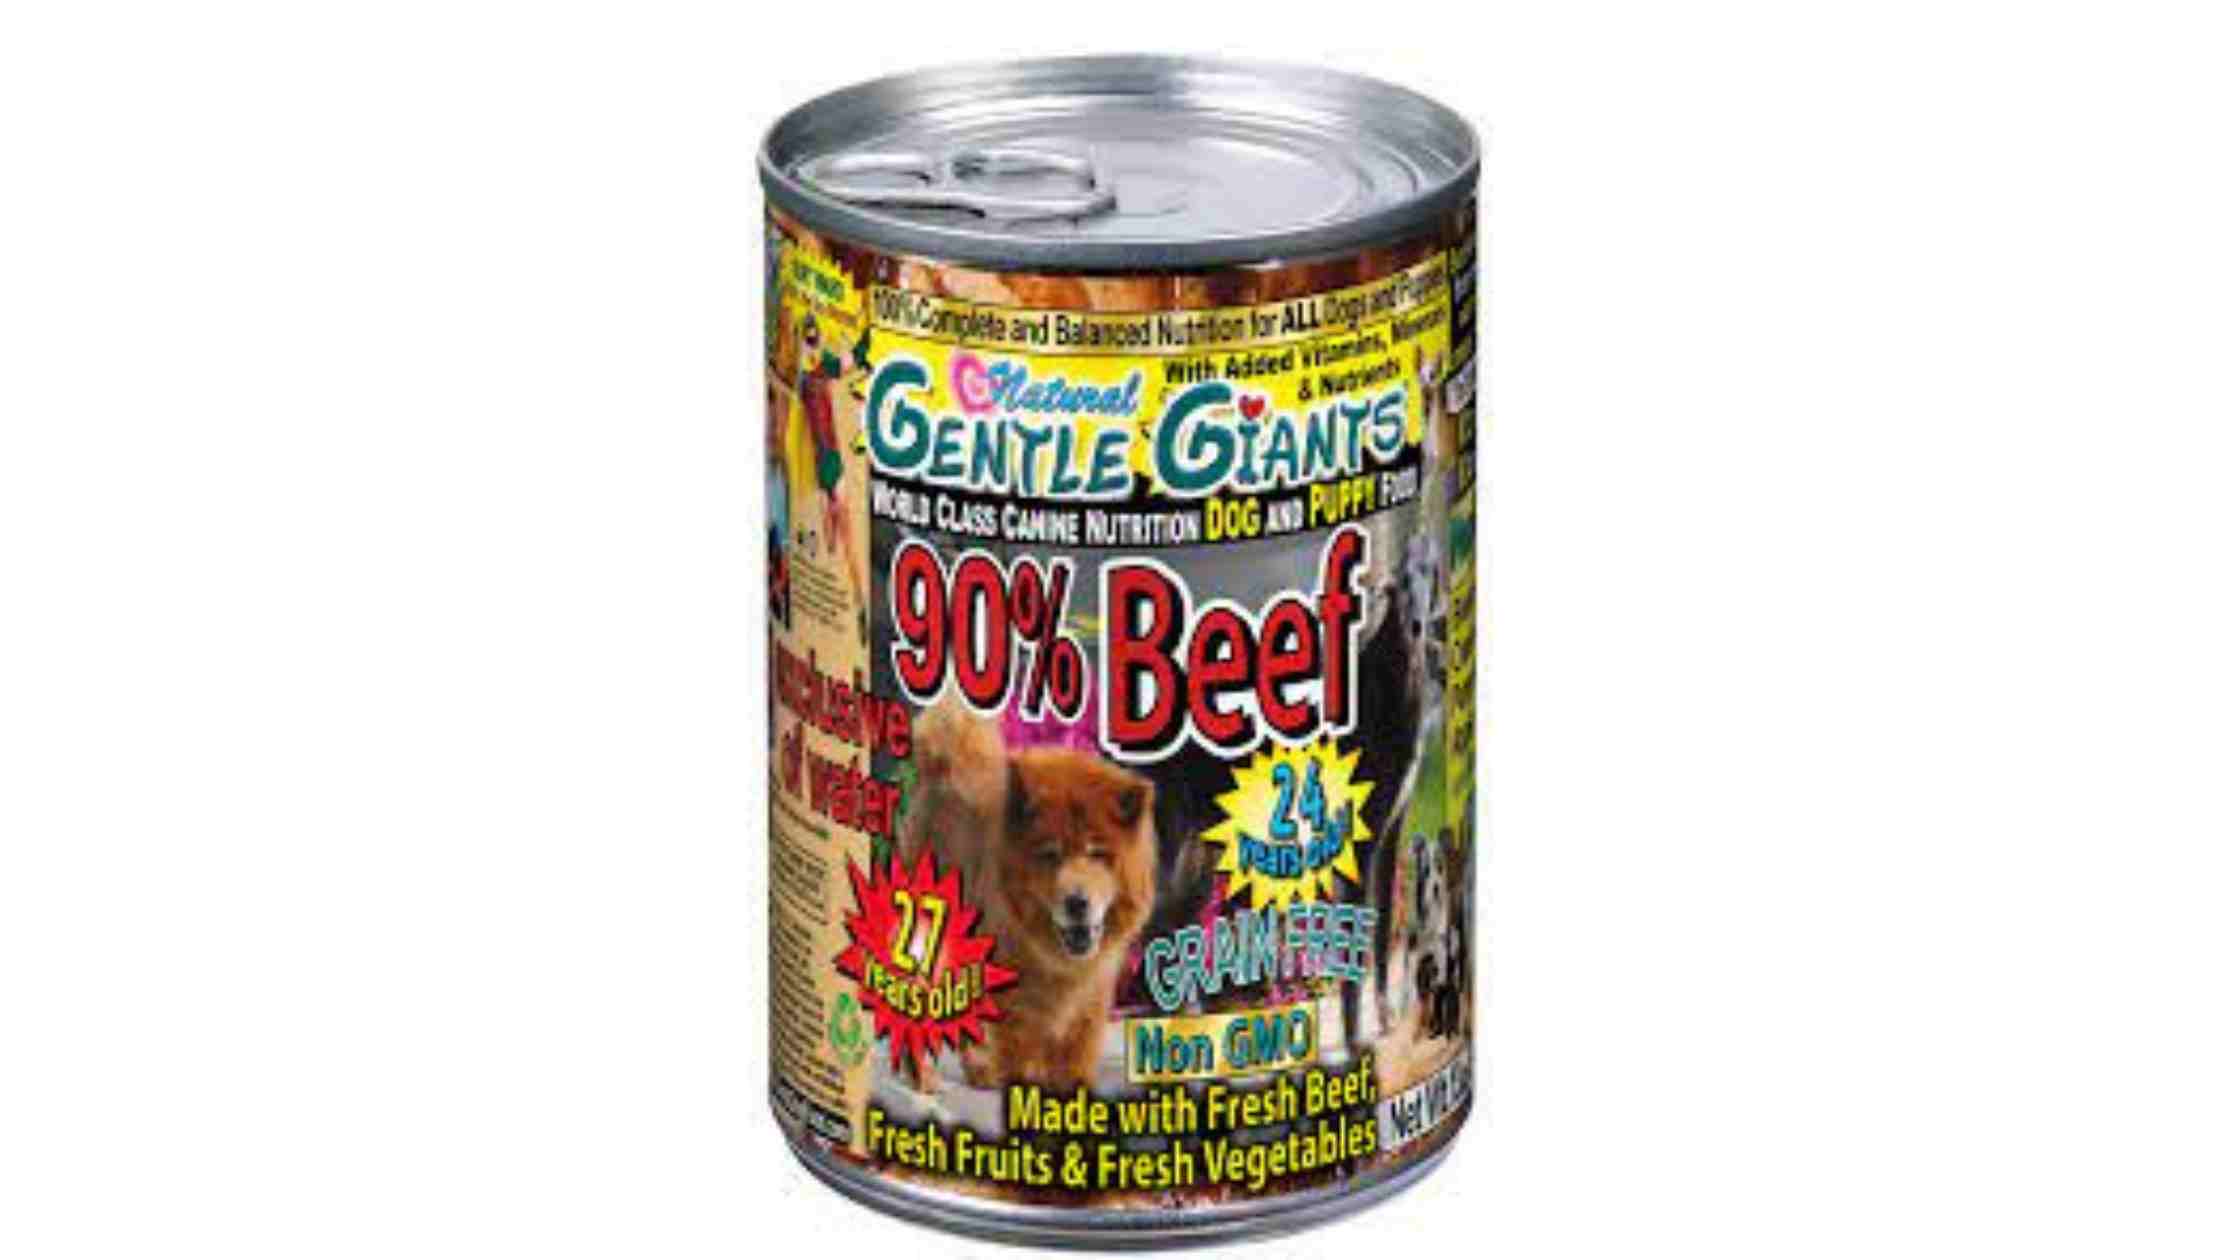 Gentle Giant Dog Food Discontinued